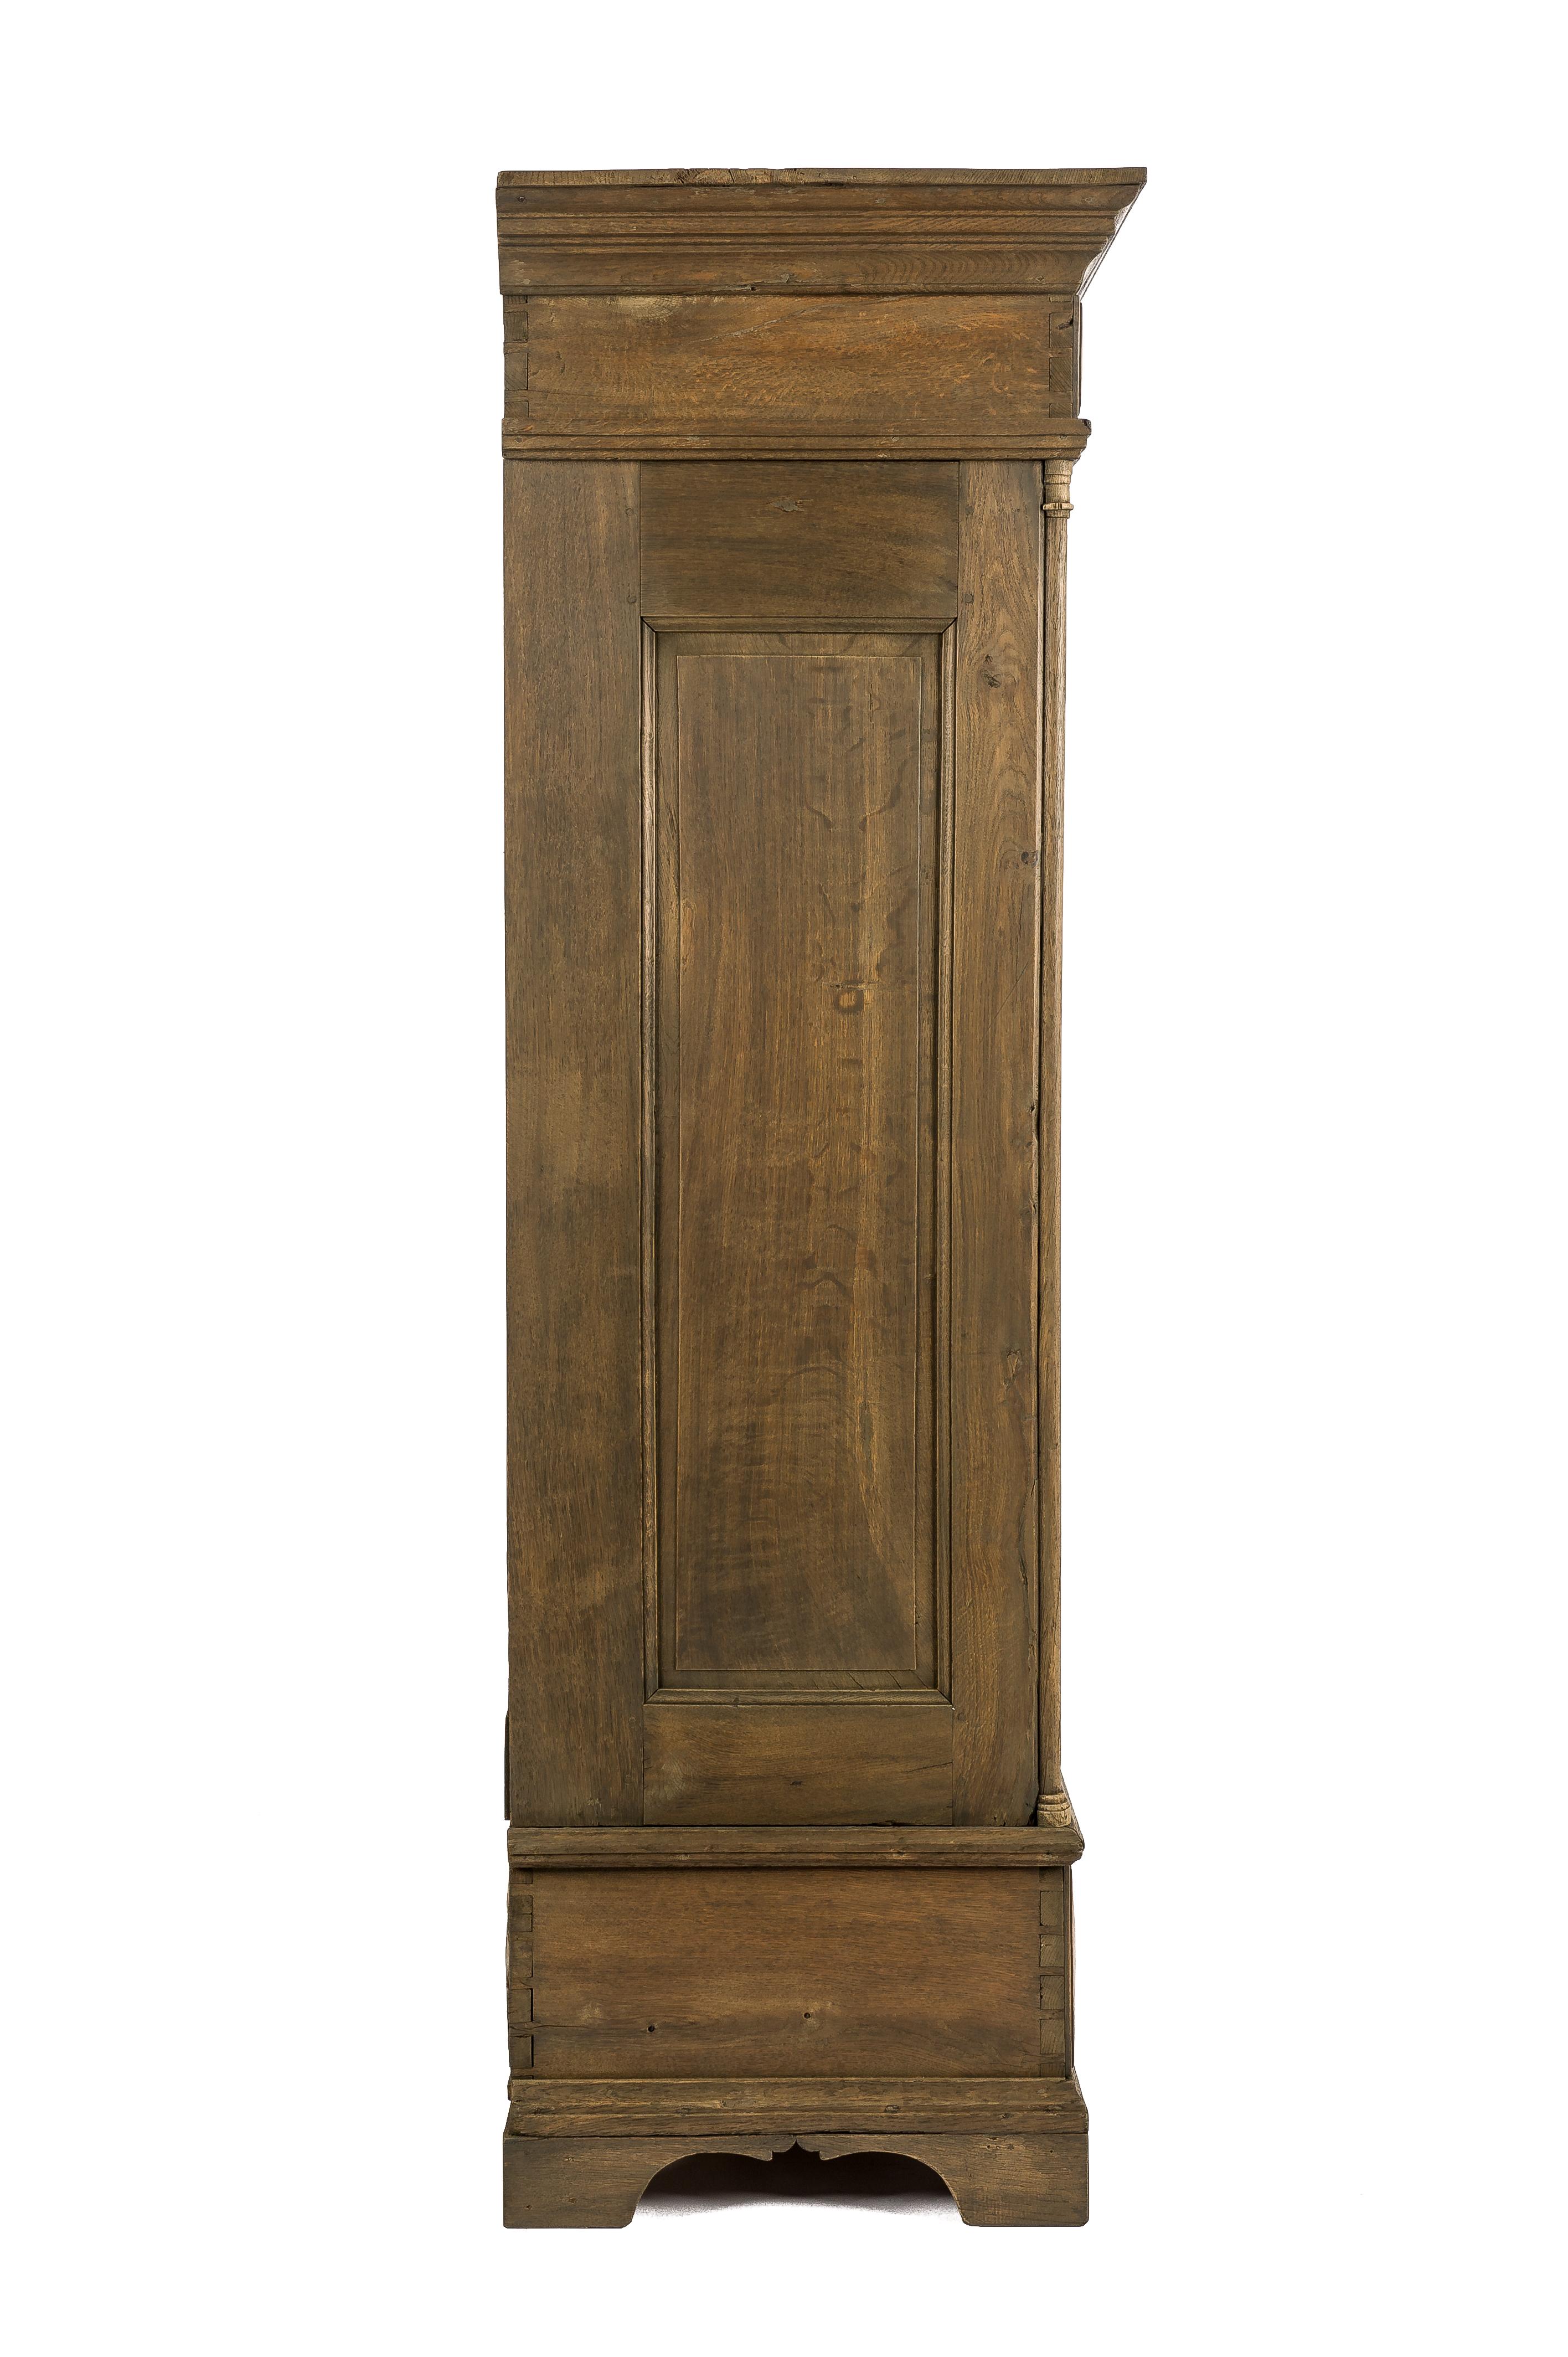 Antique 19th-century German solid oak two-door gray matte finished cupboard  For Sale 8